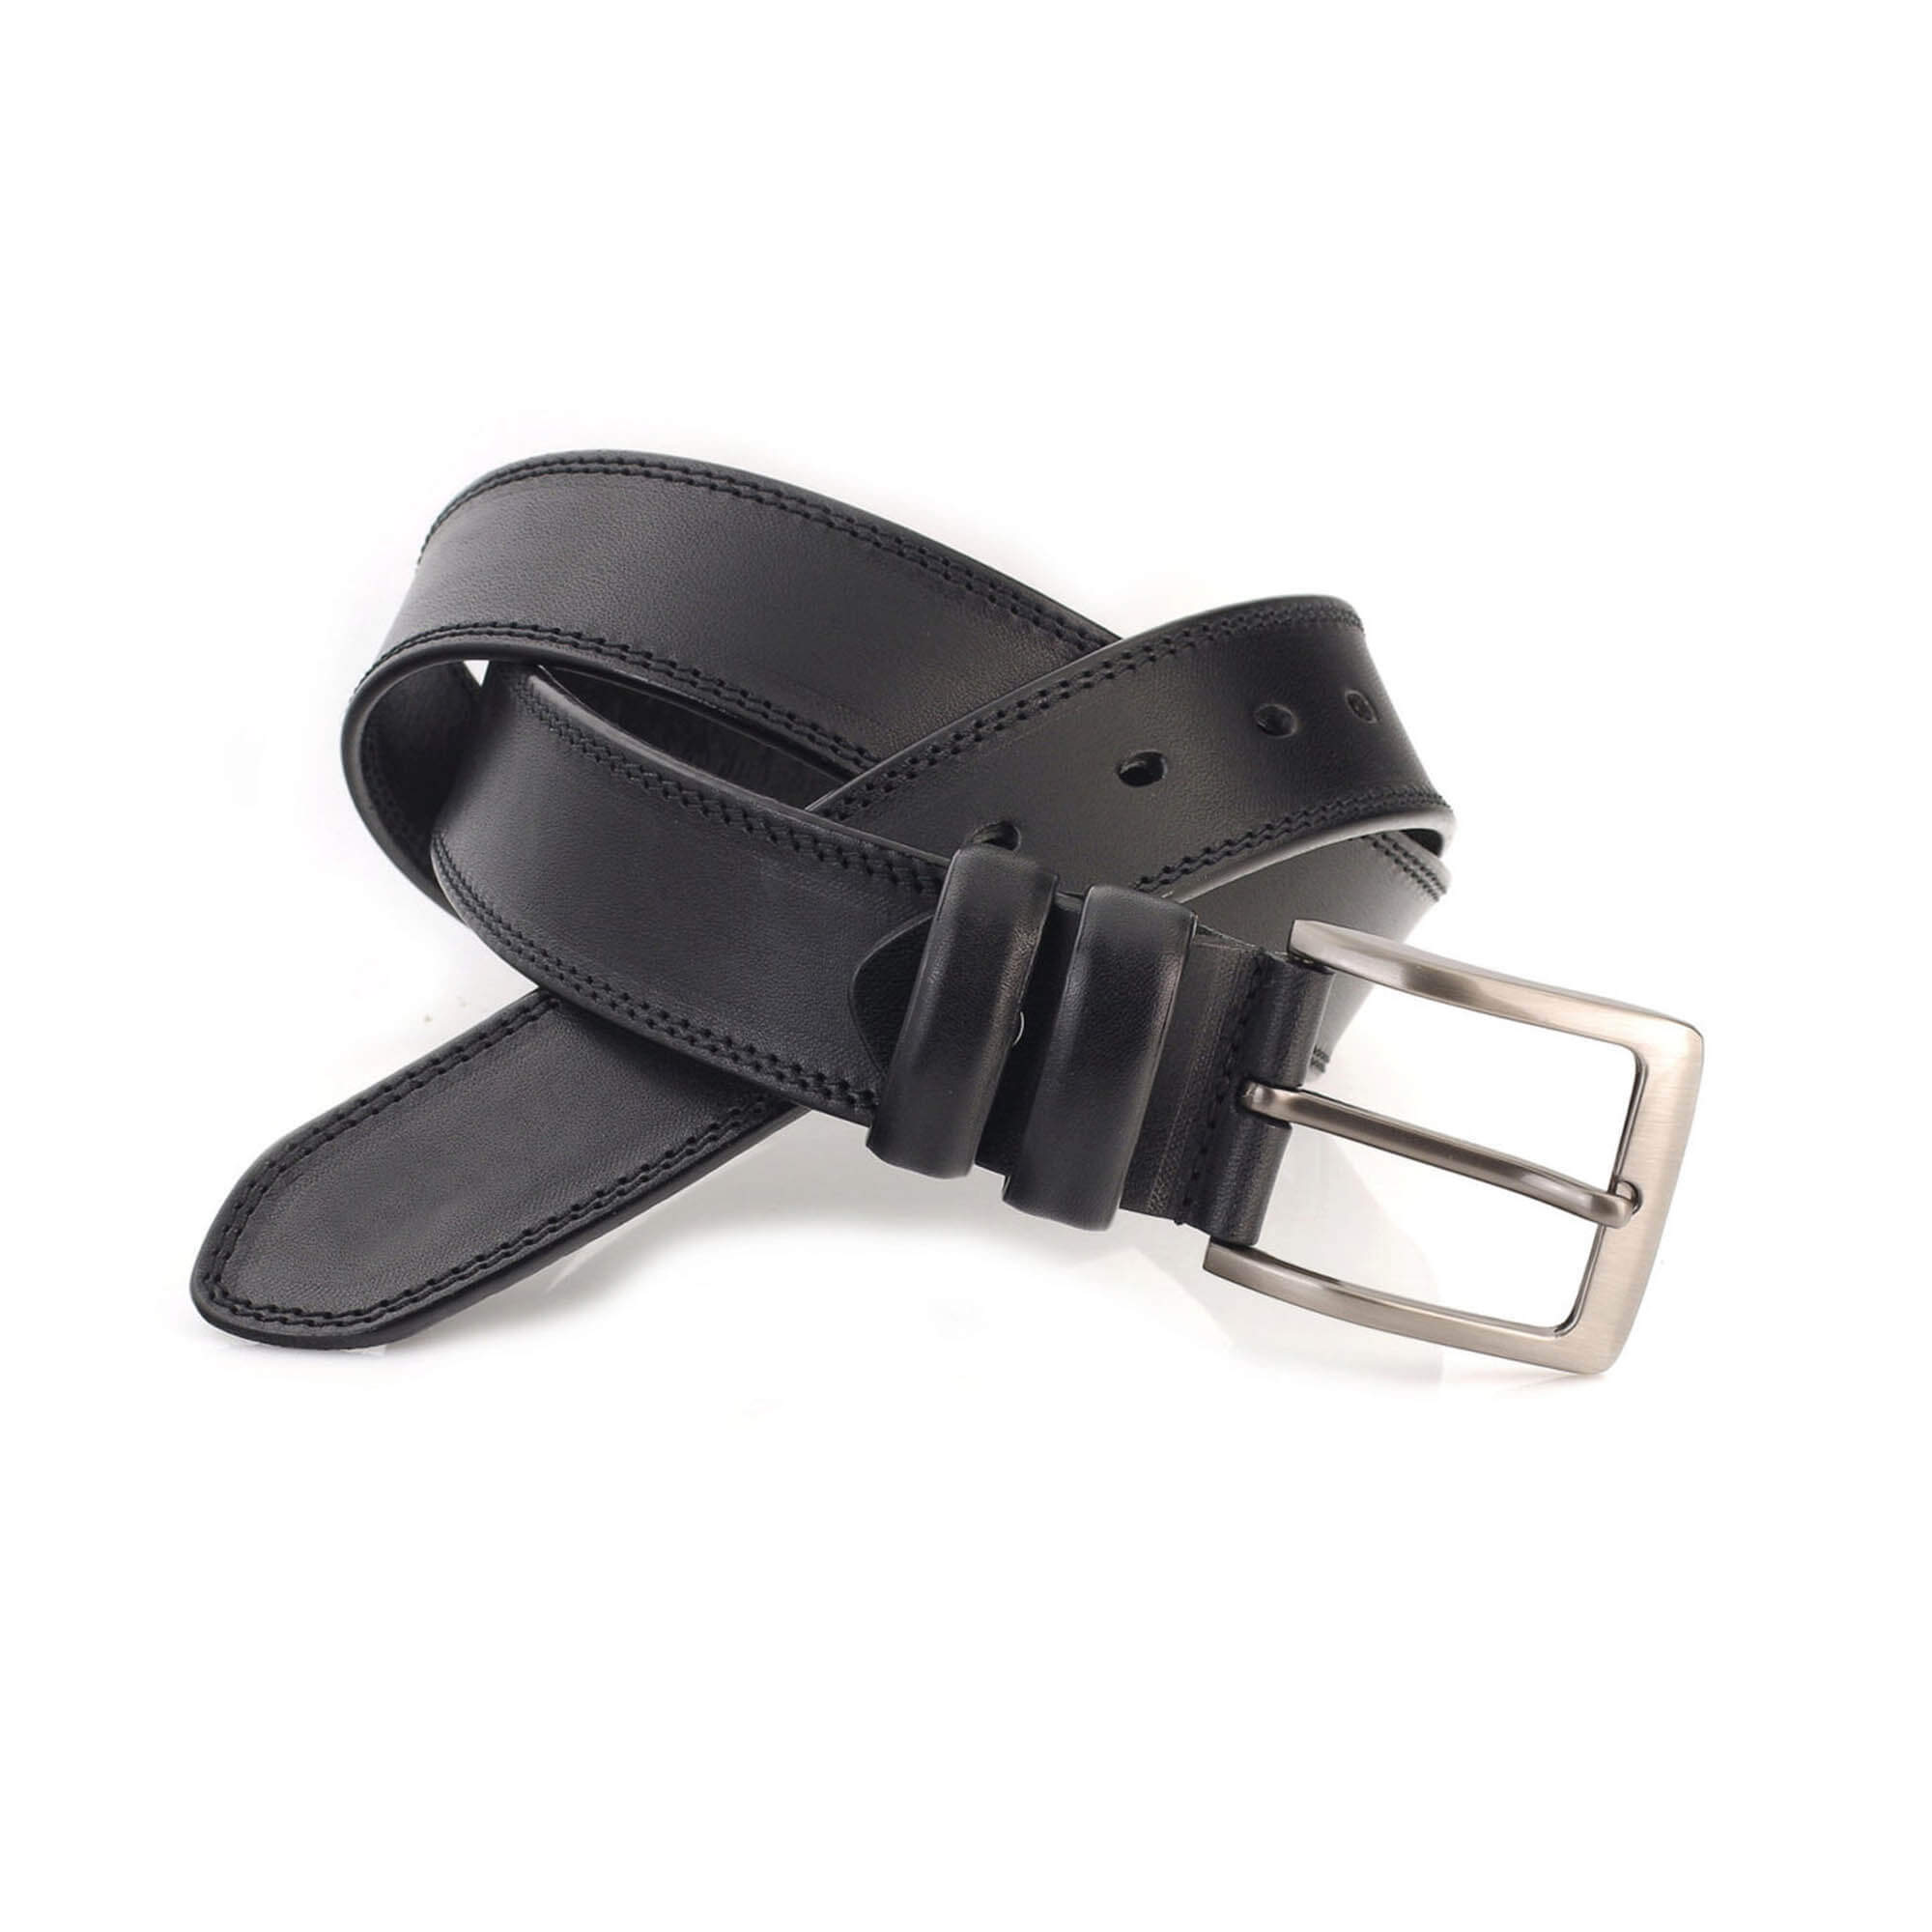 Buy Mens Cowhide Leather Belt For Black Jeans - Thick Wide